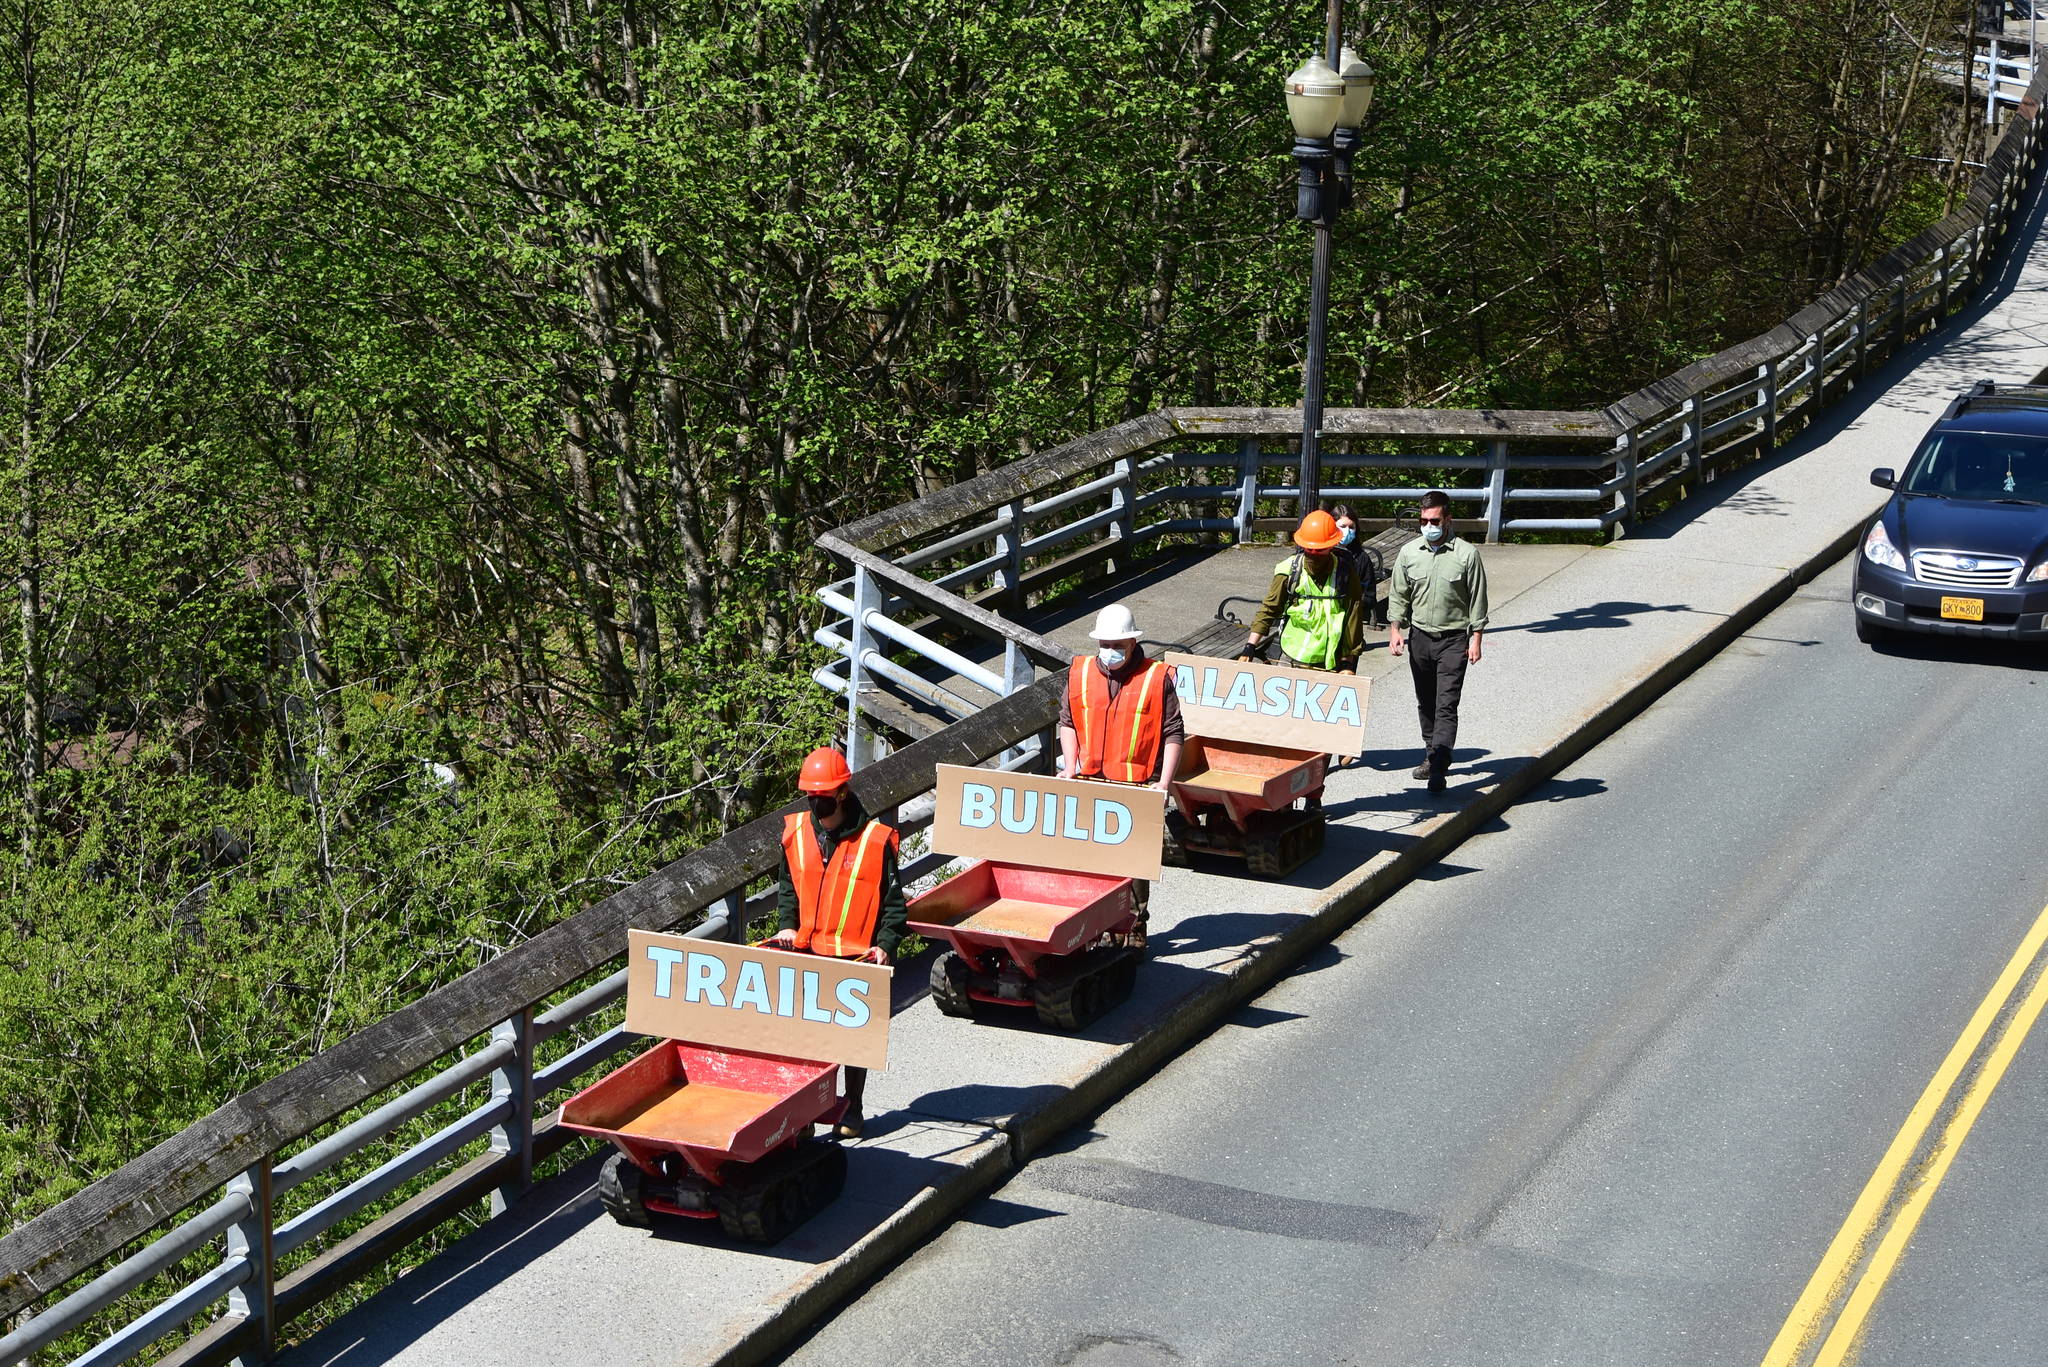 Track carriers used by trail builders to move gravel and dirt rumbled slowly down Calhoun Avenue on Tuesday, May 18, 2021, as supporters of conservation corps programs demonstrated from the Governor’s Mansion to the Alaska State Capitol. (Peter Segall / Juneau Empire)